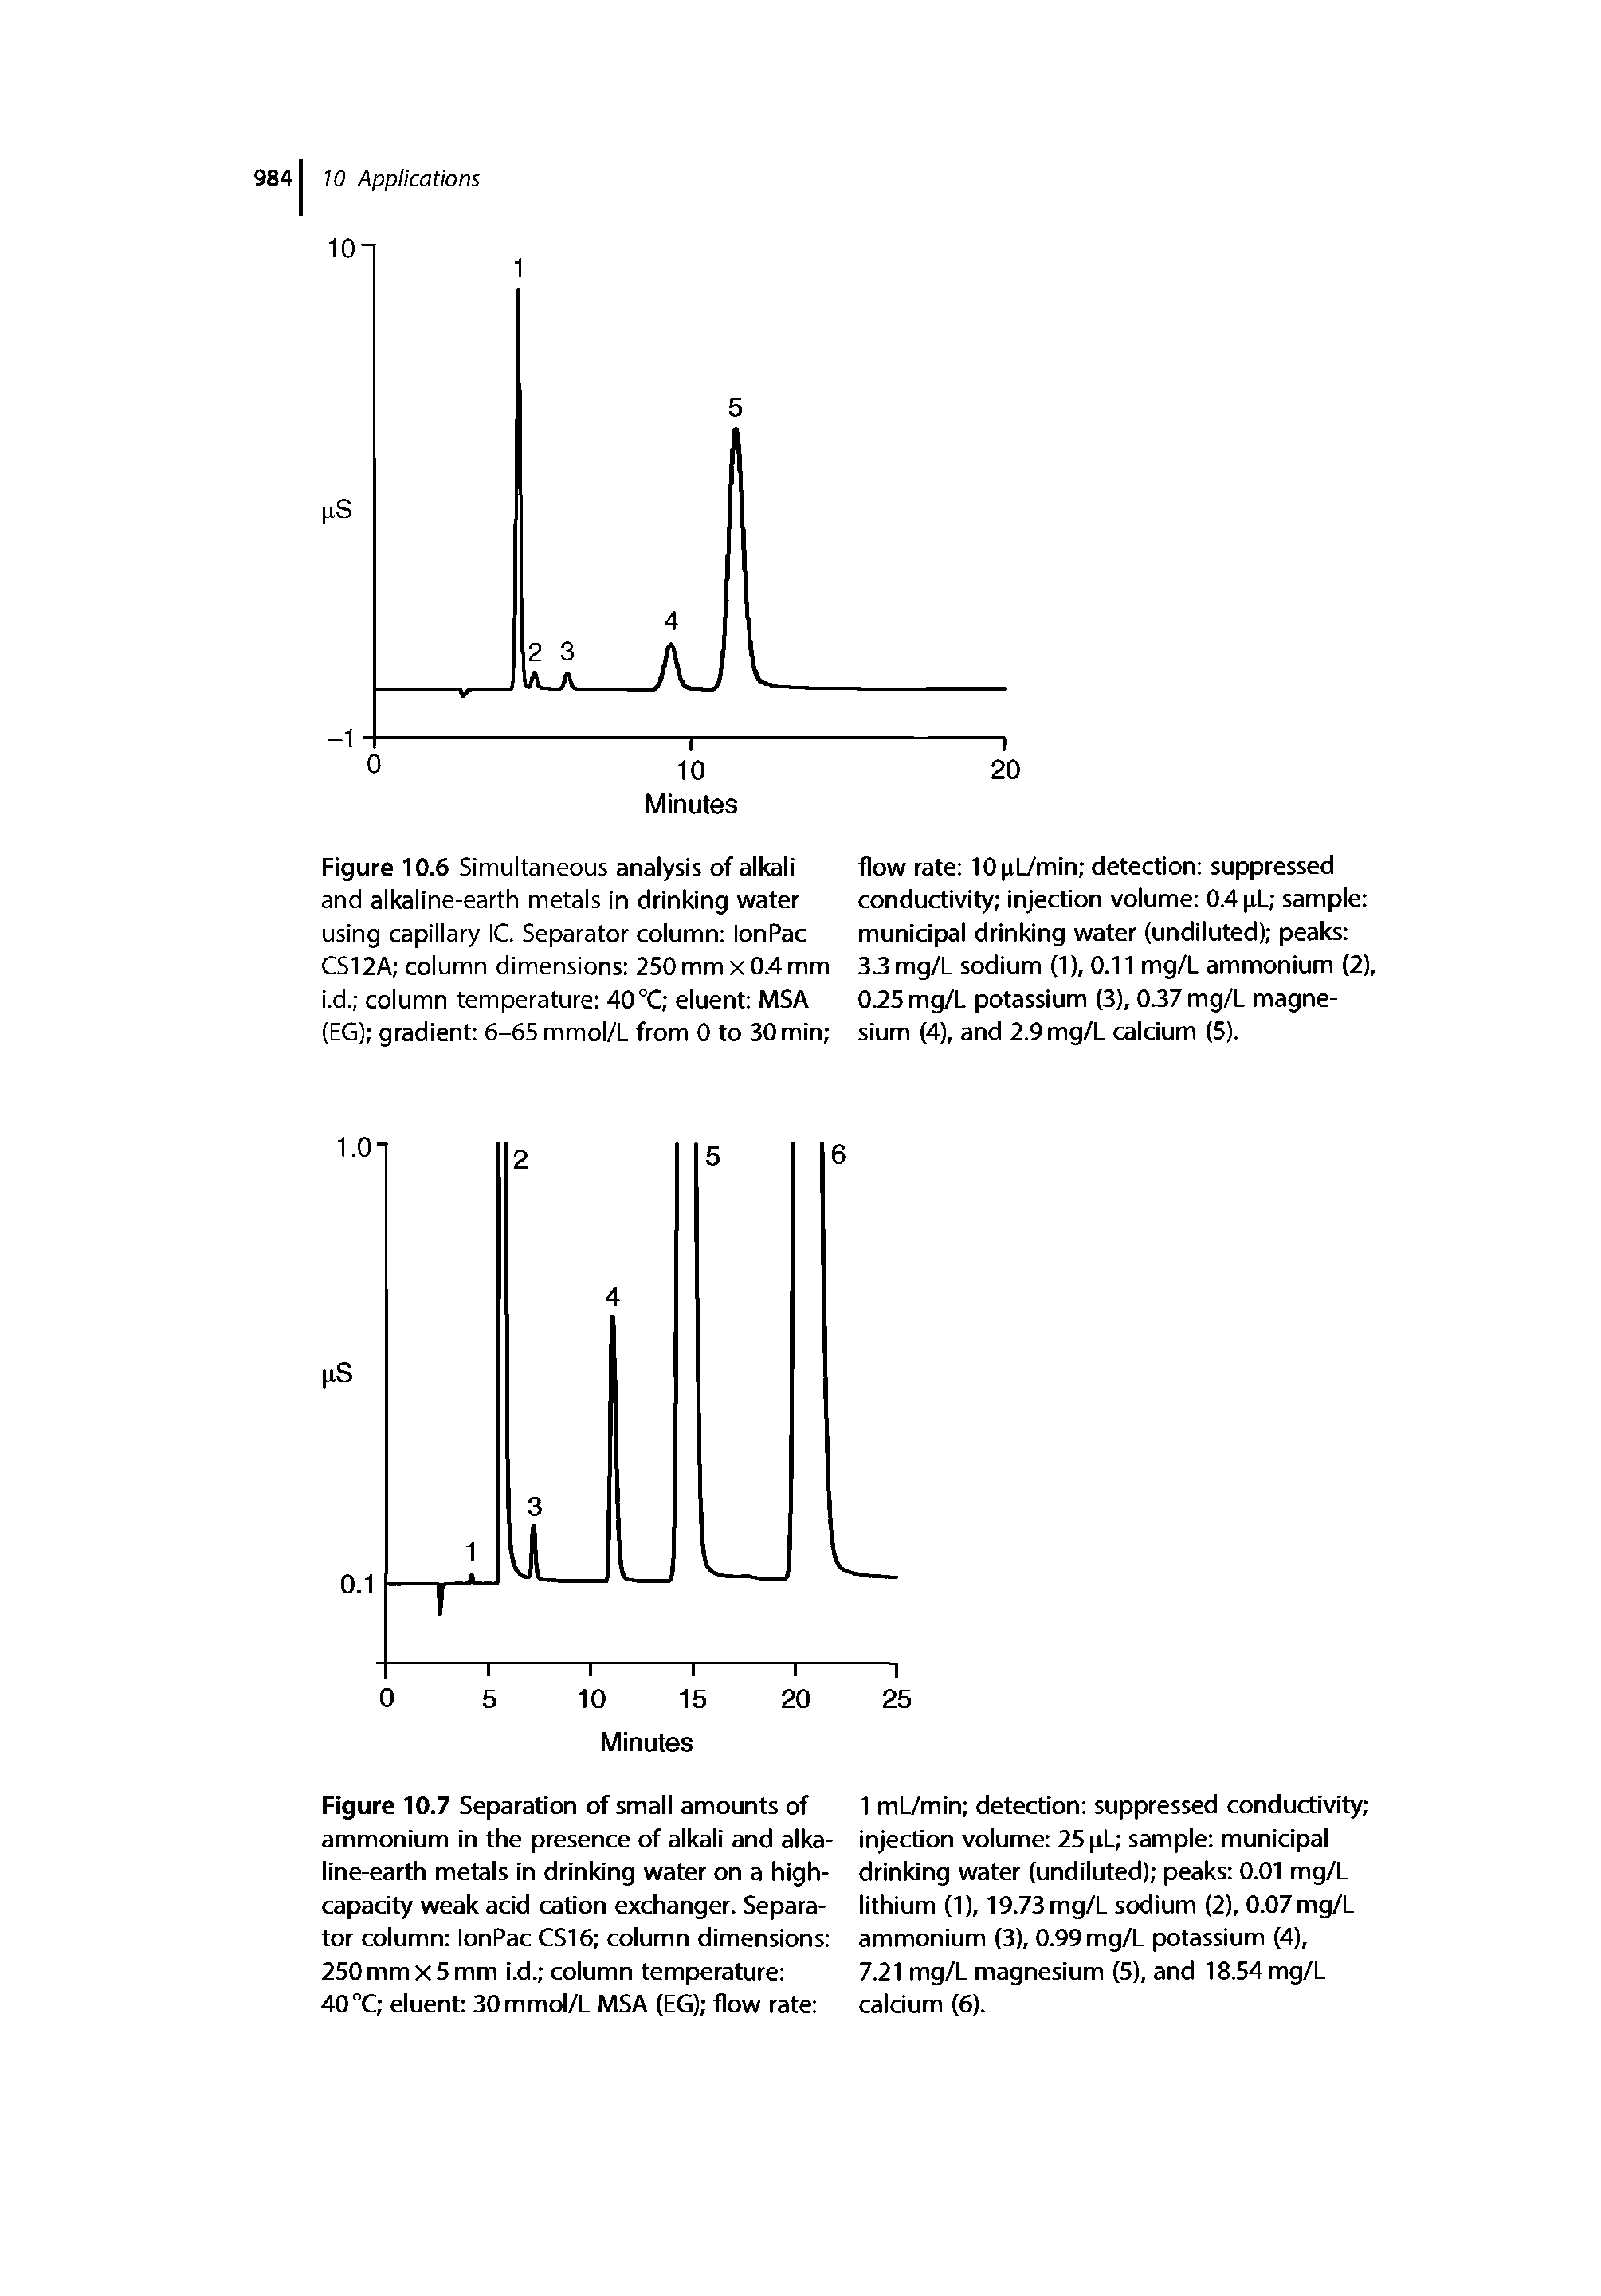 Figure 10.7 Separation of small amounts of ammonium in the presence of alkali and alkaline-earth metals in drinking water on a high-capadty weak acid cation exchanger. Separator column lonPac CS16 column dimensions 250 mm X 5 mm i.d. column temperature ...